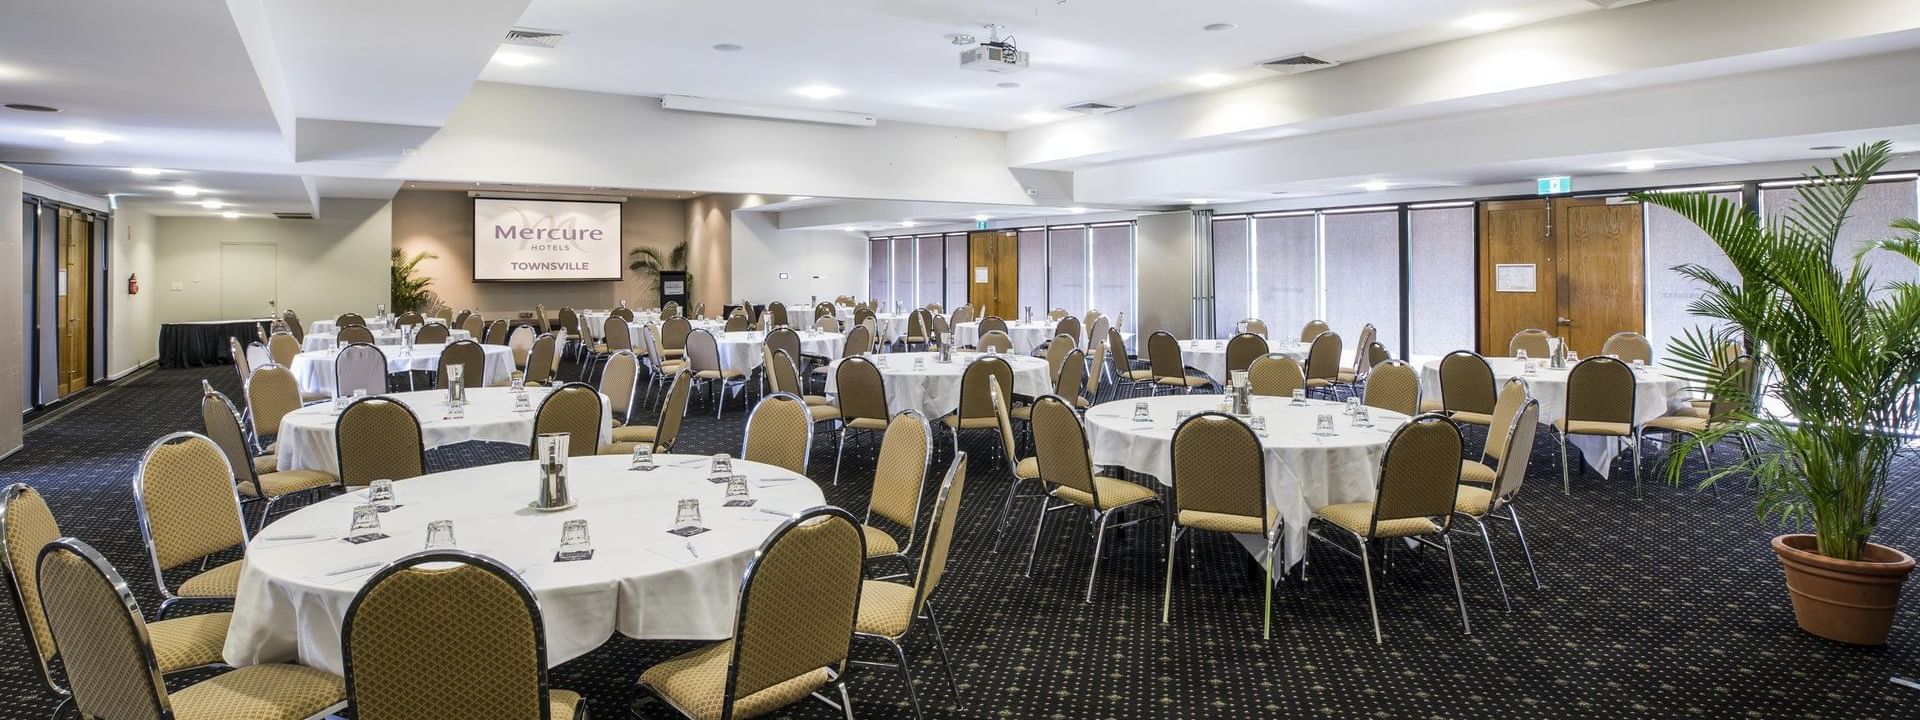 Properly arranged meetings at Mercure Hotel Townsville